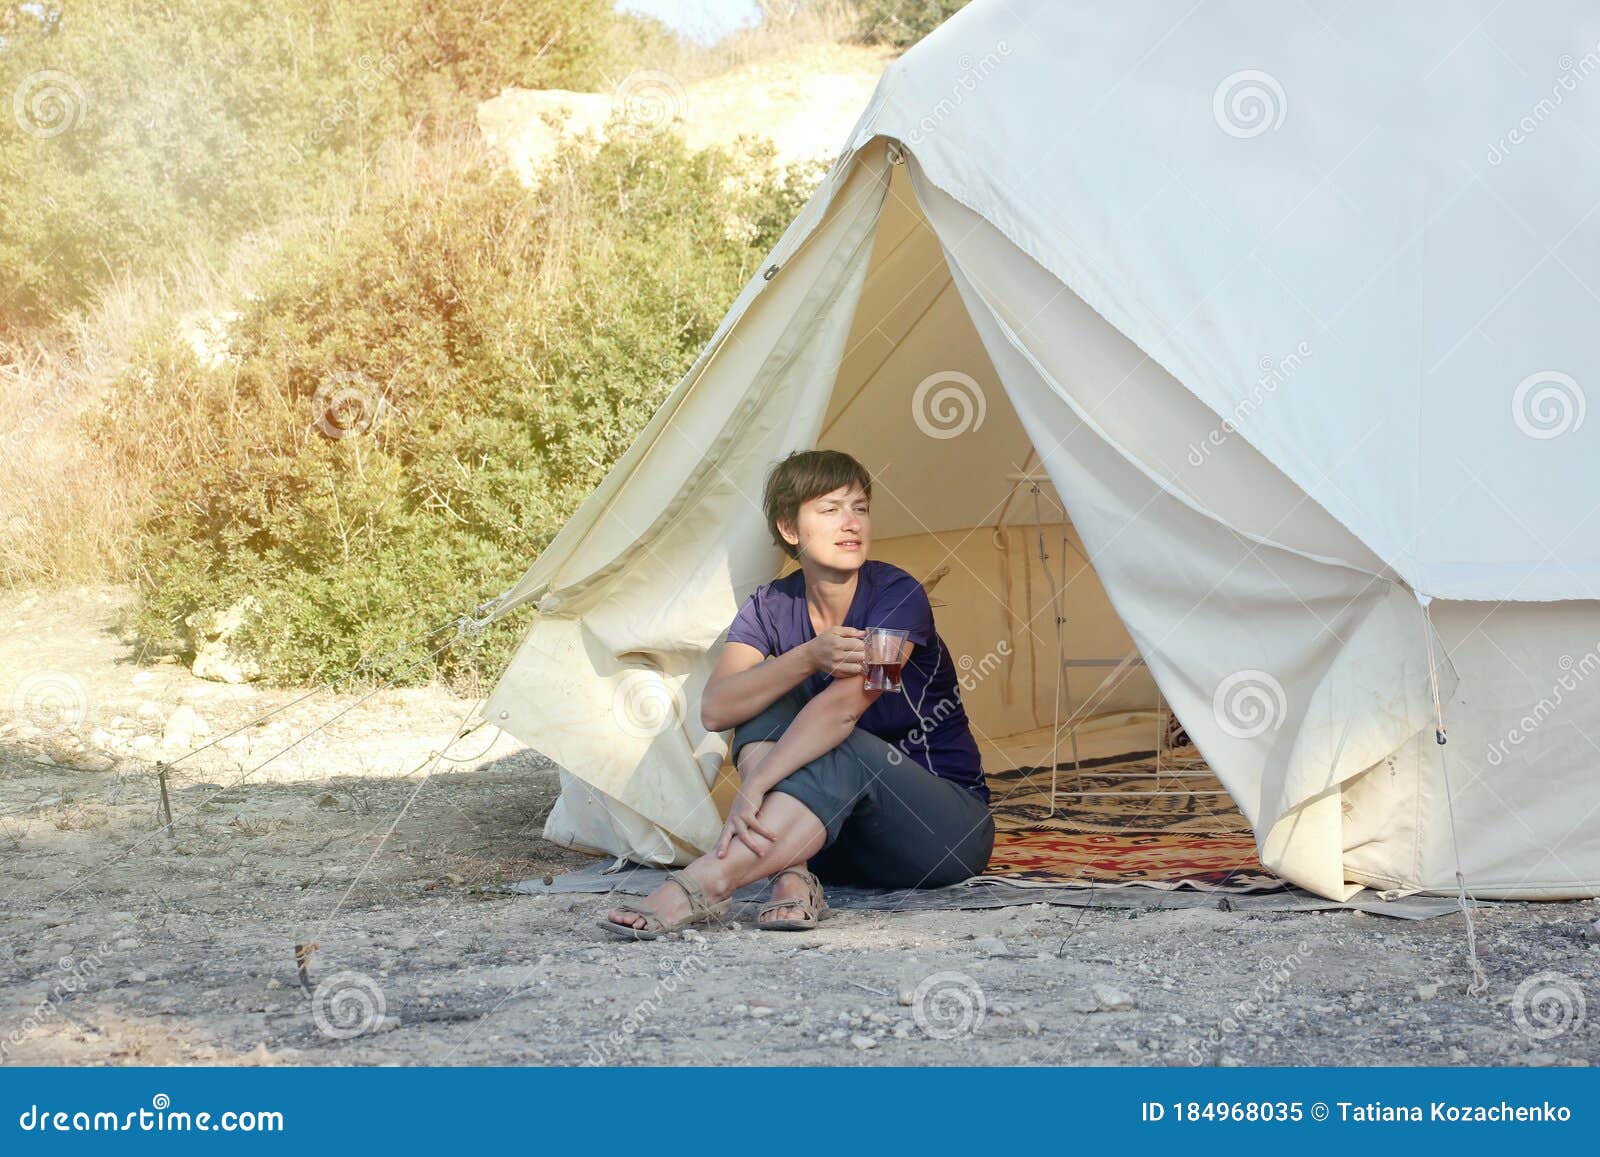 glamping outdoor vacation. woman drinking tea near big camping tent with cozy interior. luxury travel accomodation into the forest